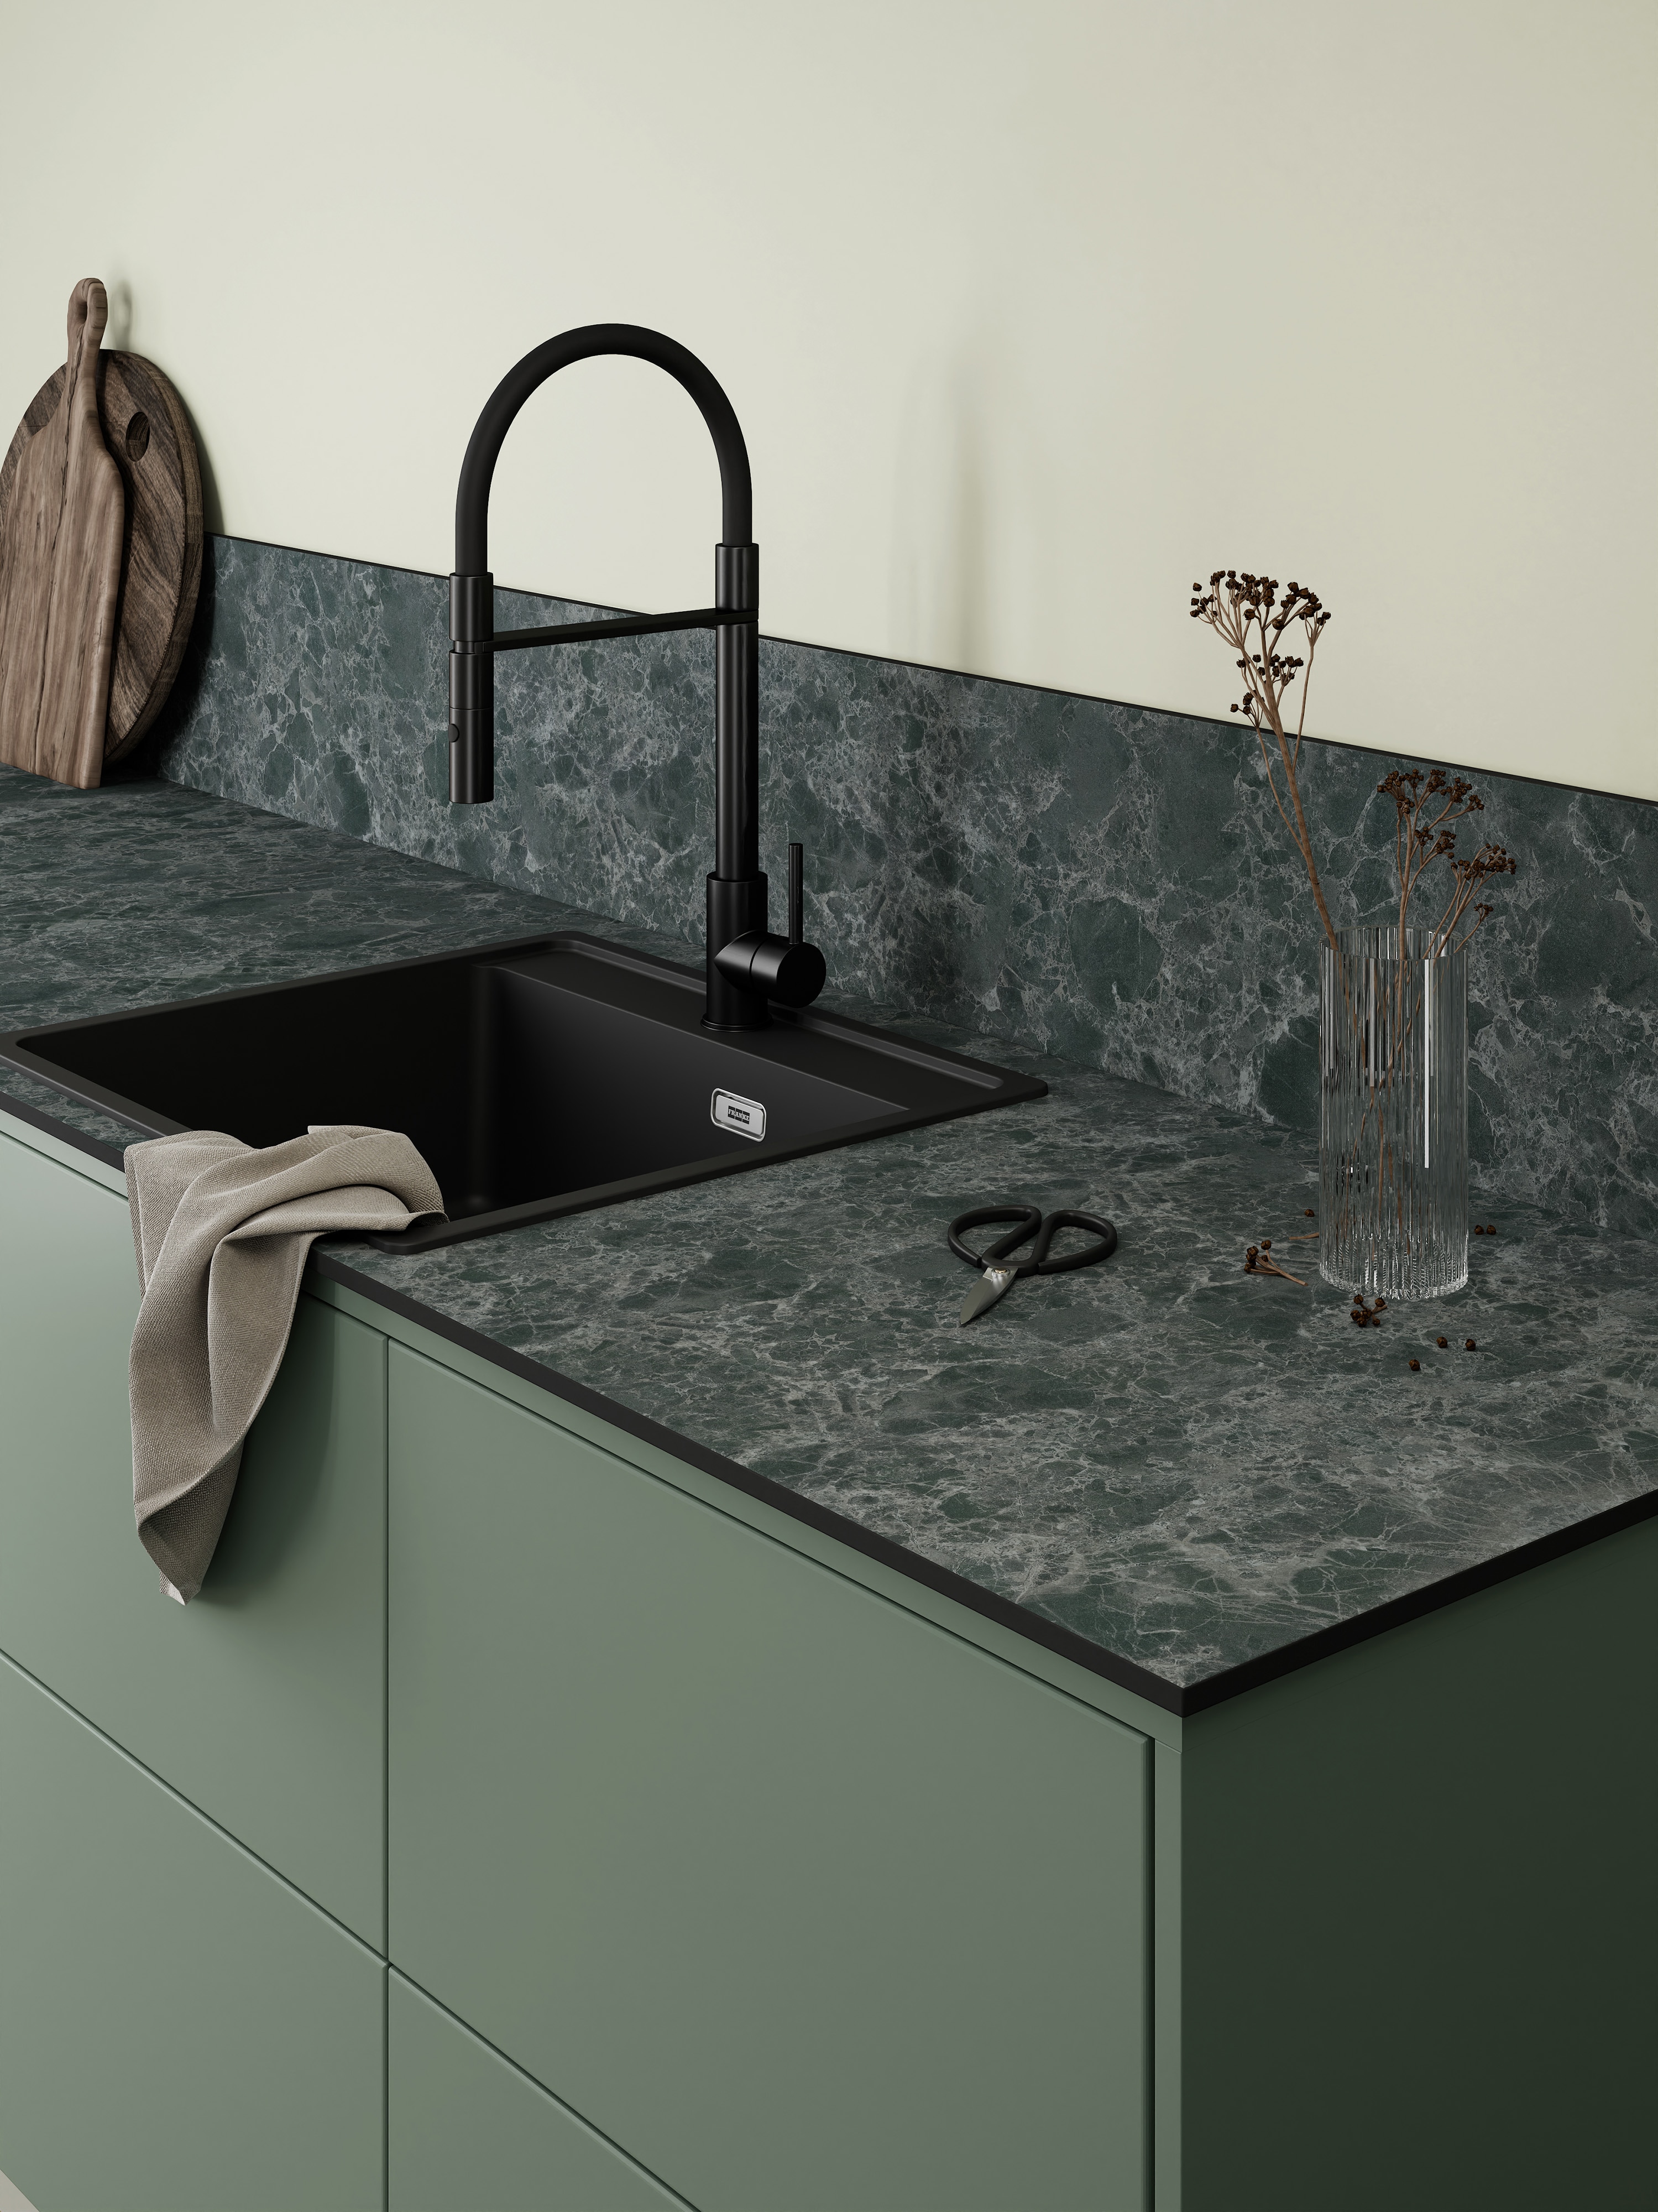 Petrol green Epoq kitchen with black faucet